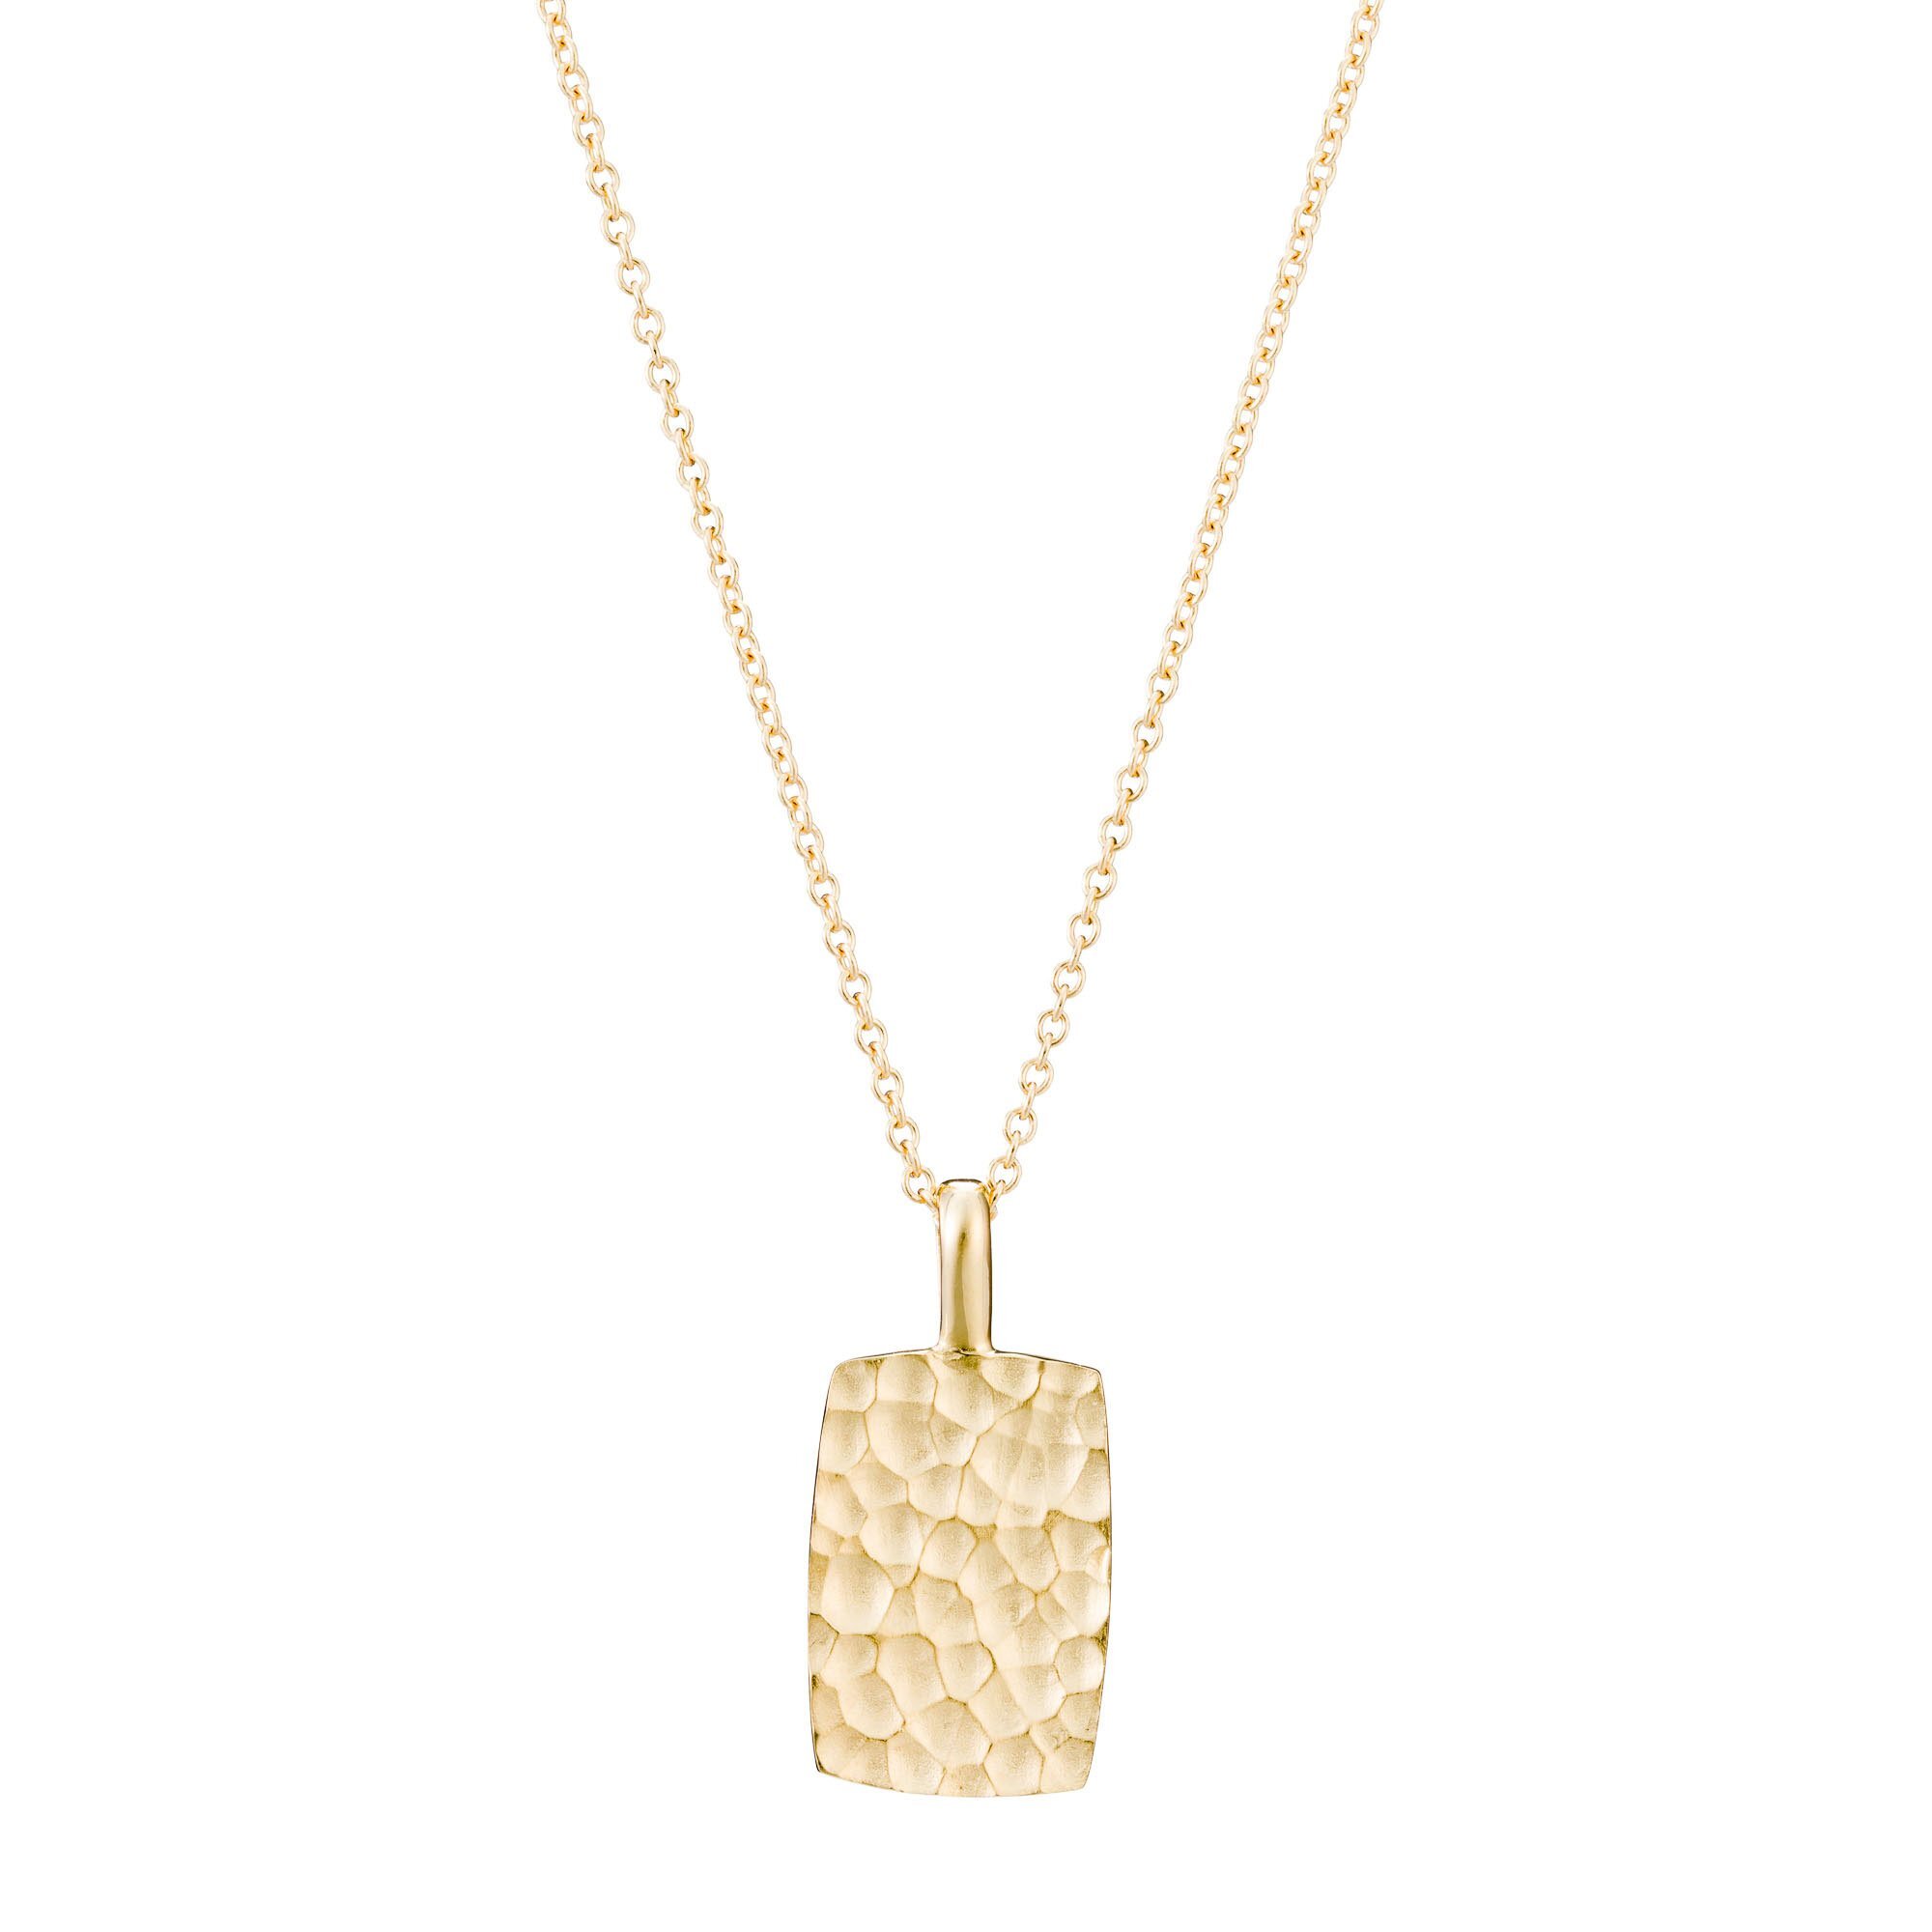 Carved-Tag-Necklace-yellow-gold_2000x.jpeg